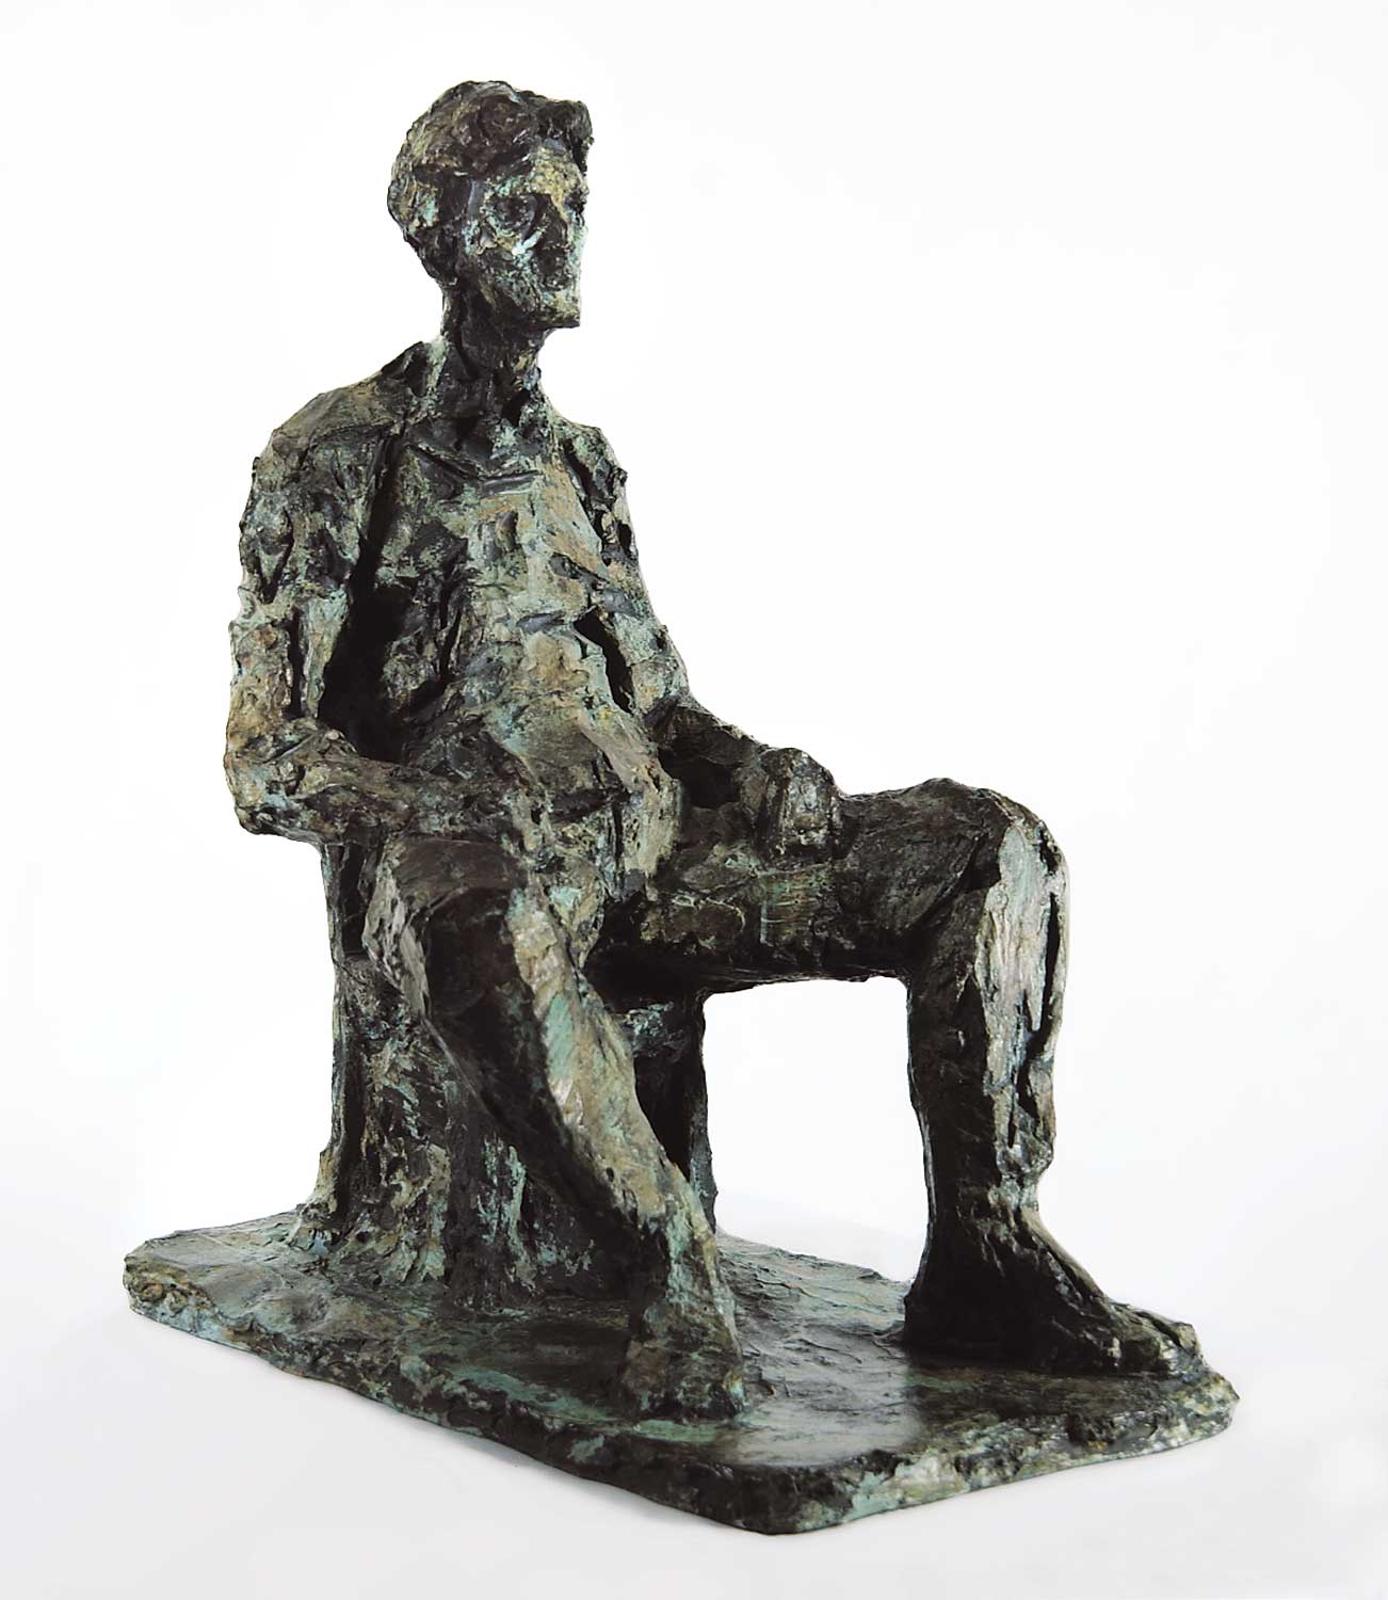 William Chattaway - Untitled - Seated Man  #1/6